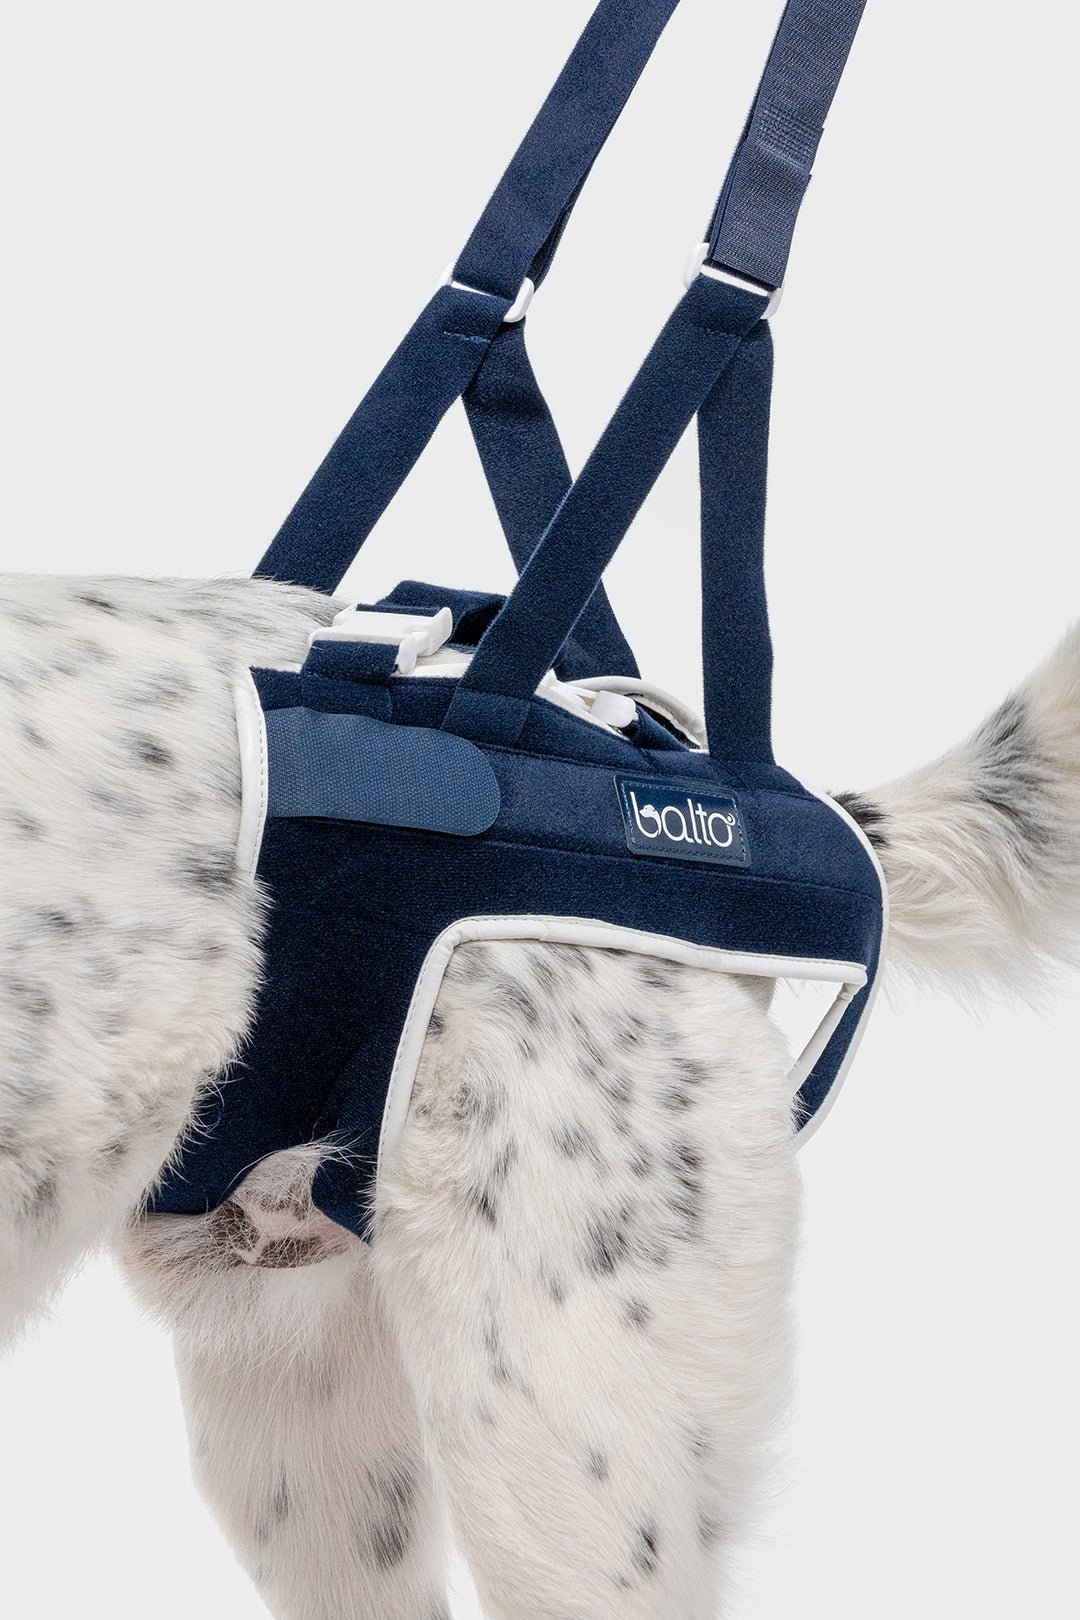 balto canada up hip brace for canines close up view detail of brace